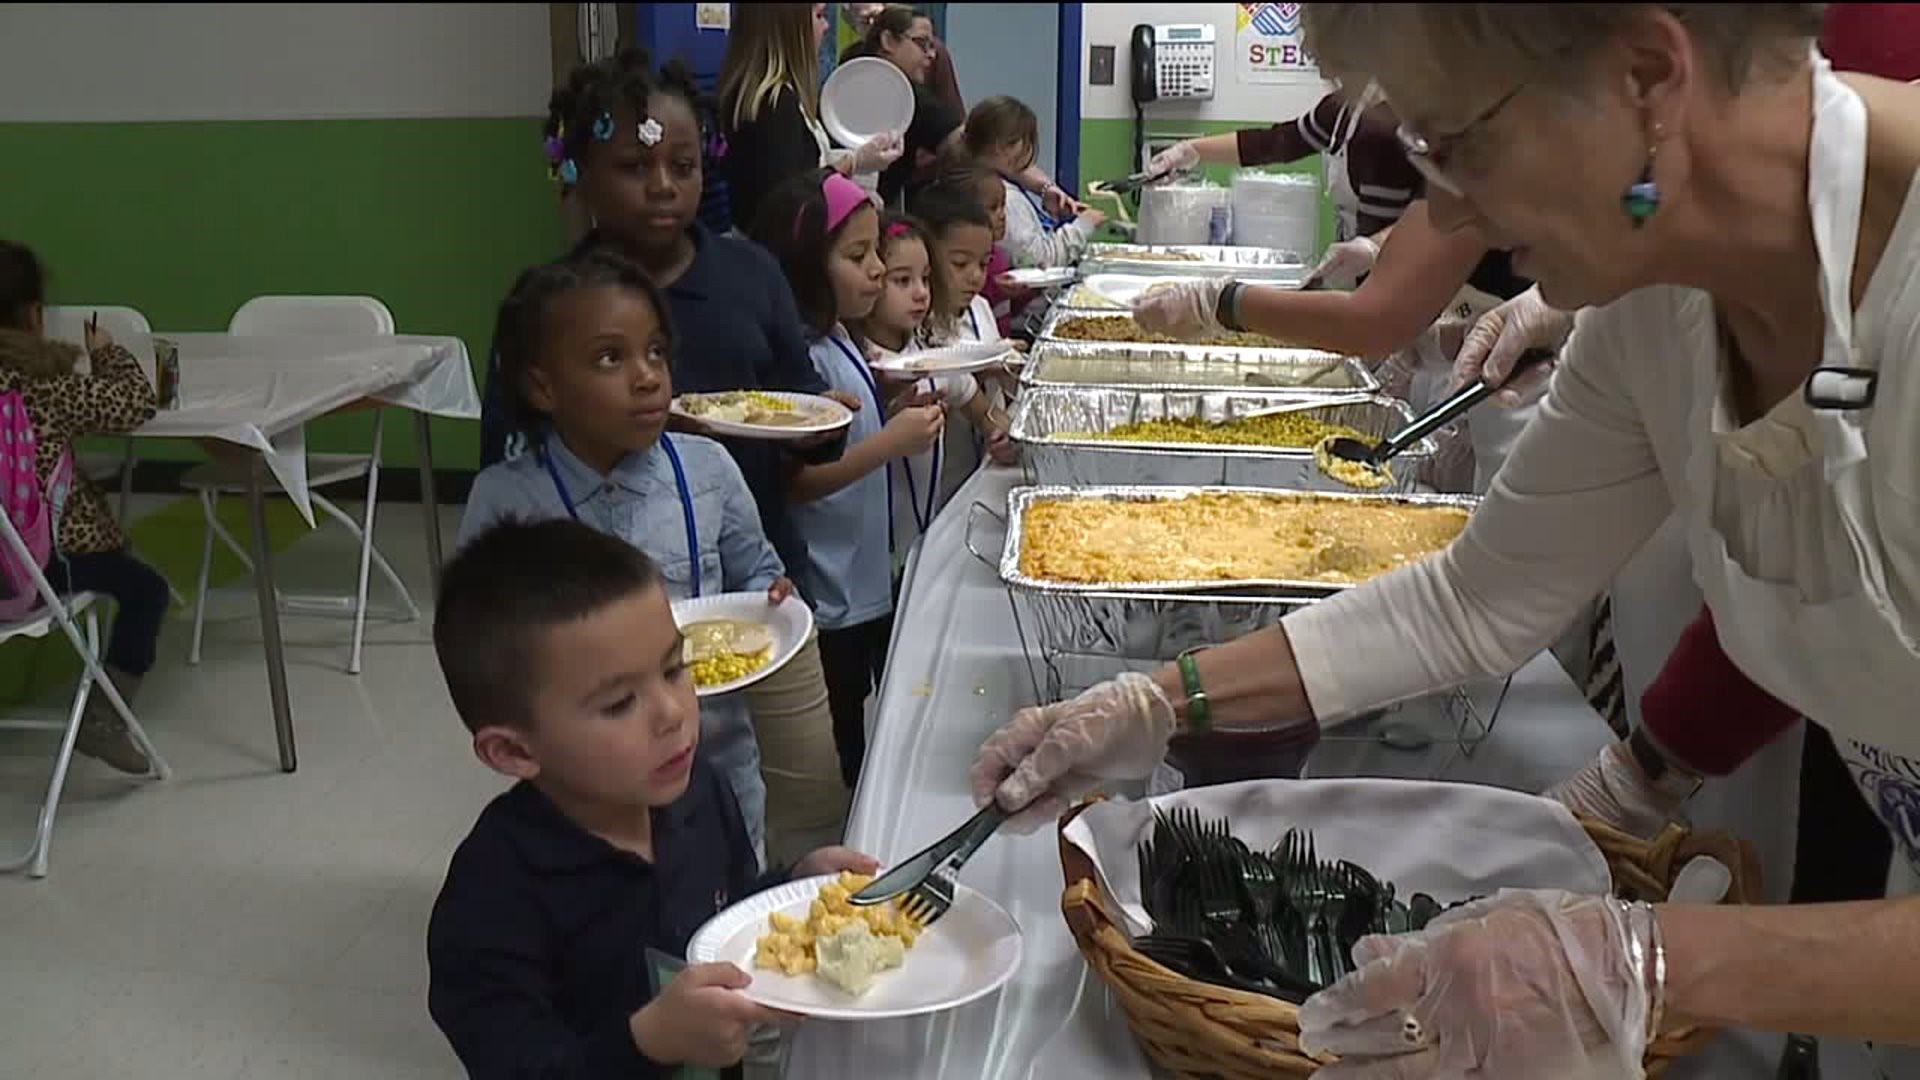 Annual Turkey Dinner Dishes Out Some Thanksgiving Favorites for At-Risk Children